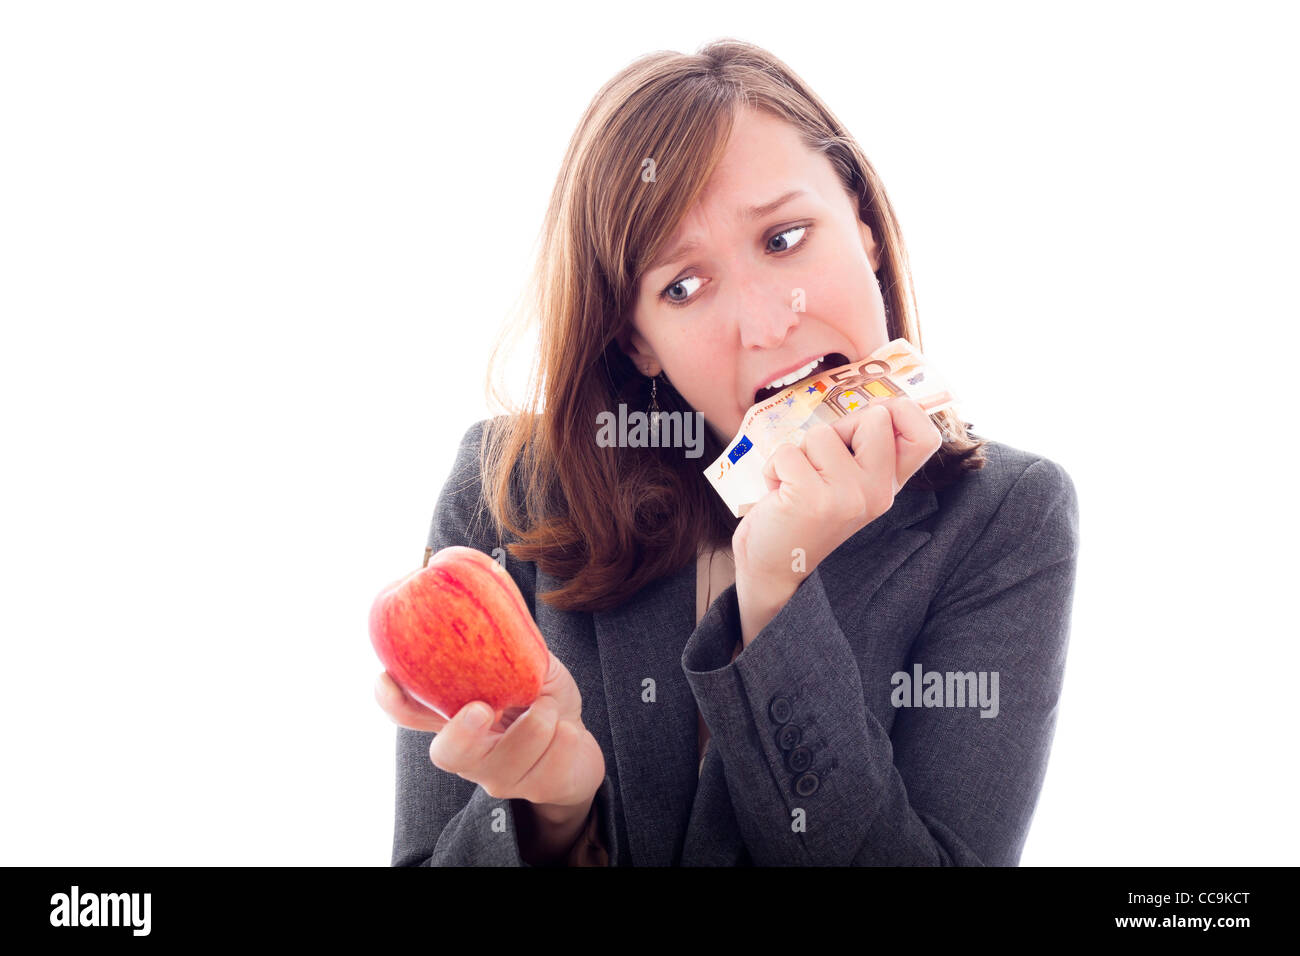 European crisis concept. Desperate woman with apple, eating Euro bank note, isolated on white background. Stock Photo